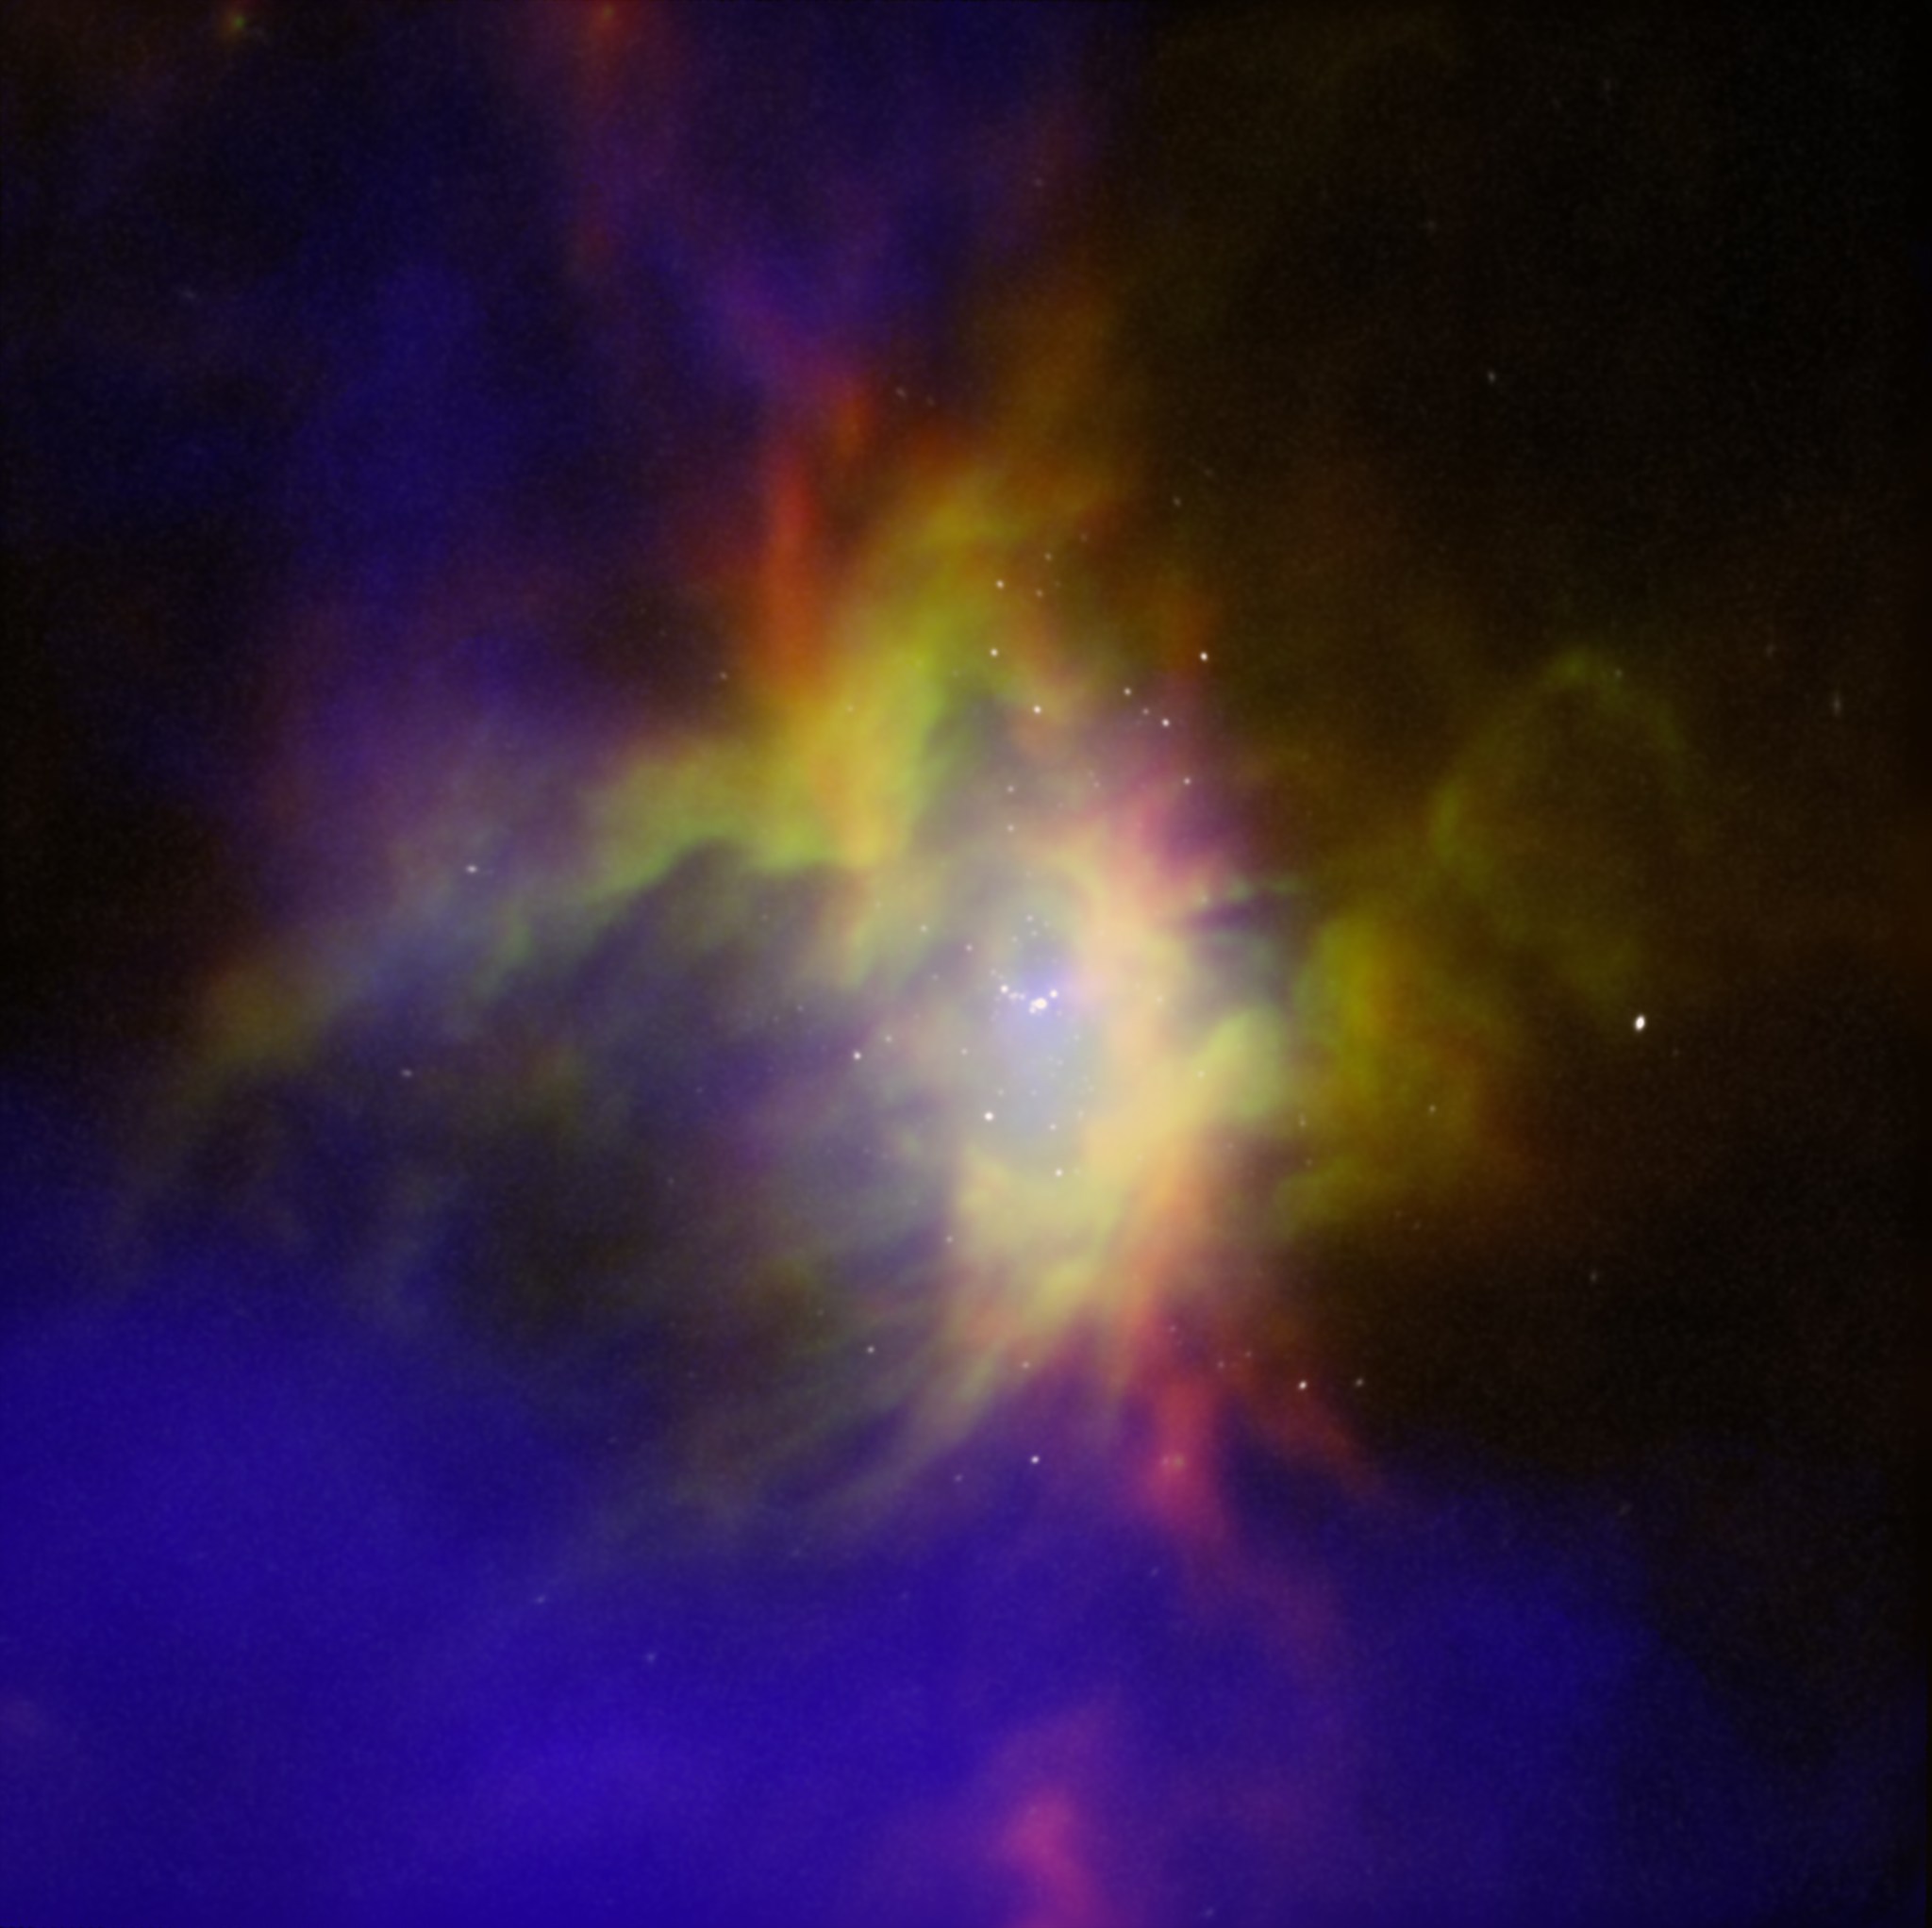 A cluster of stars that make up a ray of colors, raining from blue, green, yellow, red, and pink